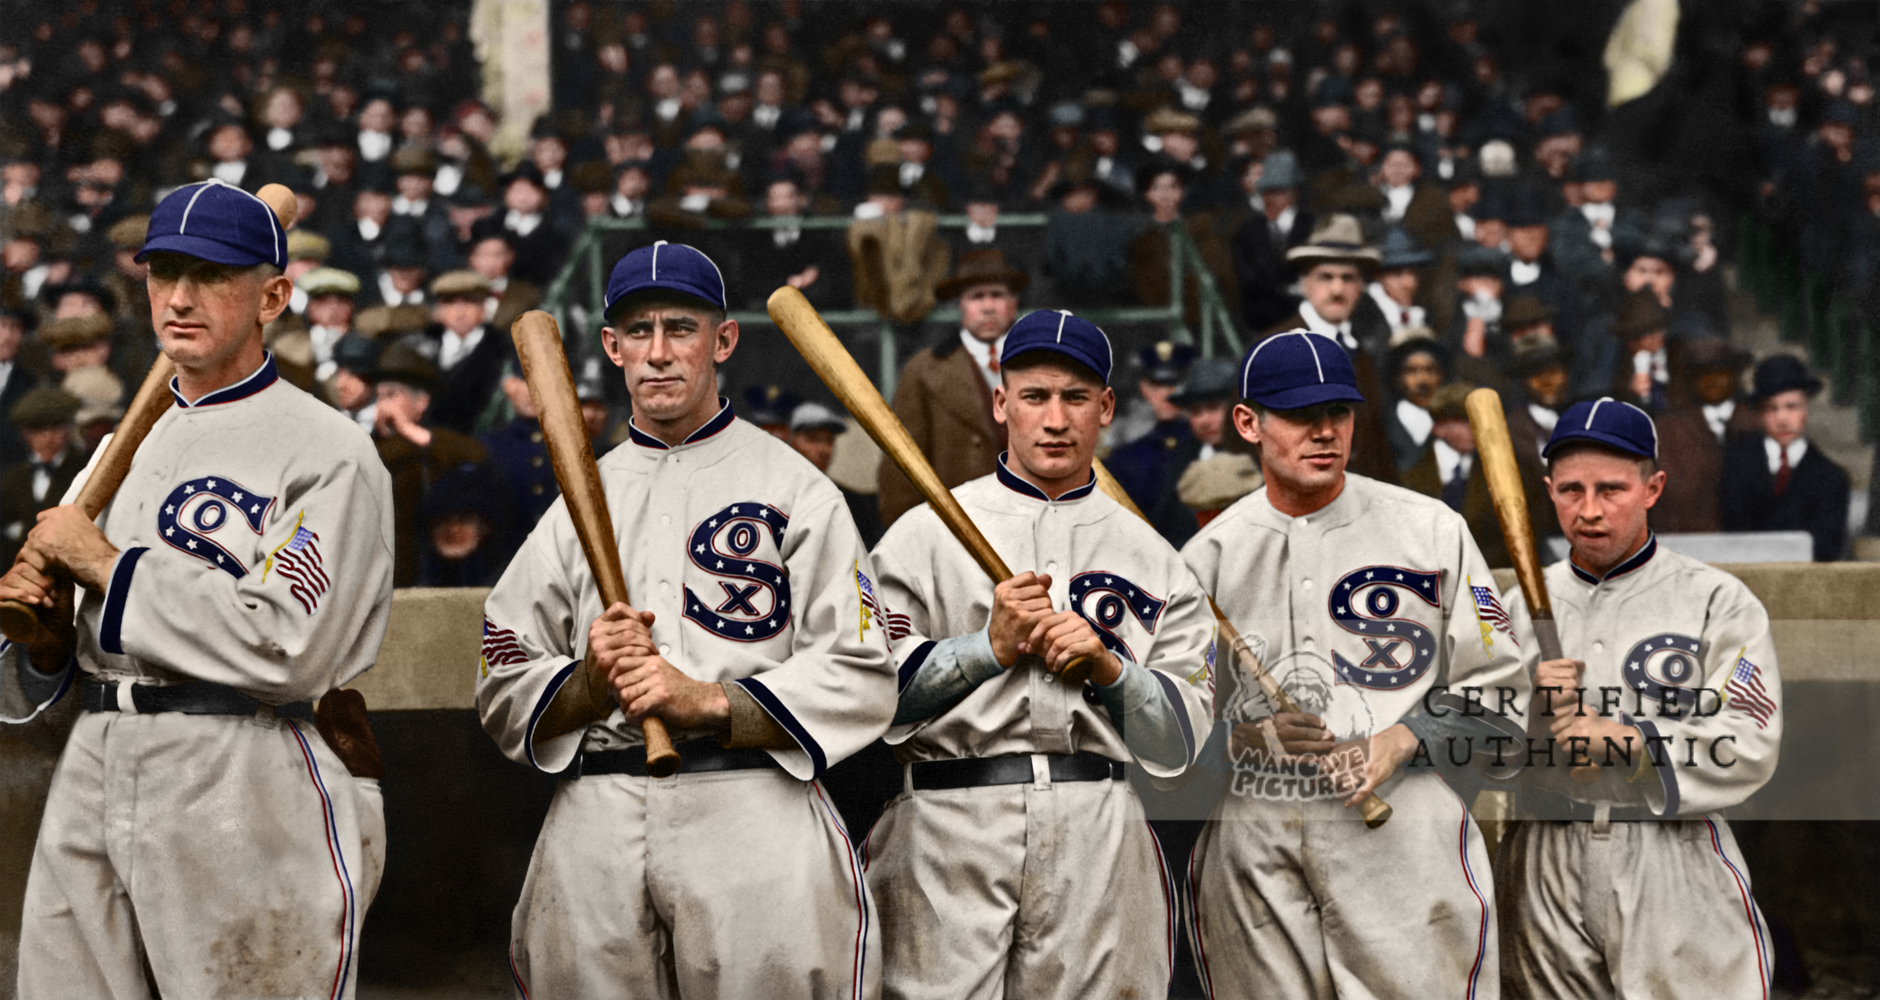 Chicago White Sox - World Series Champion Outfield (1917)